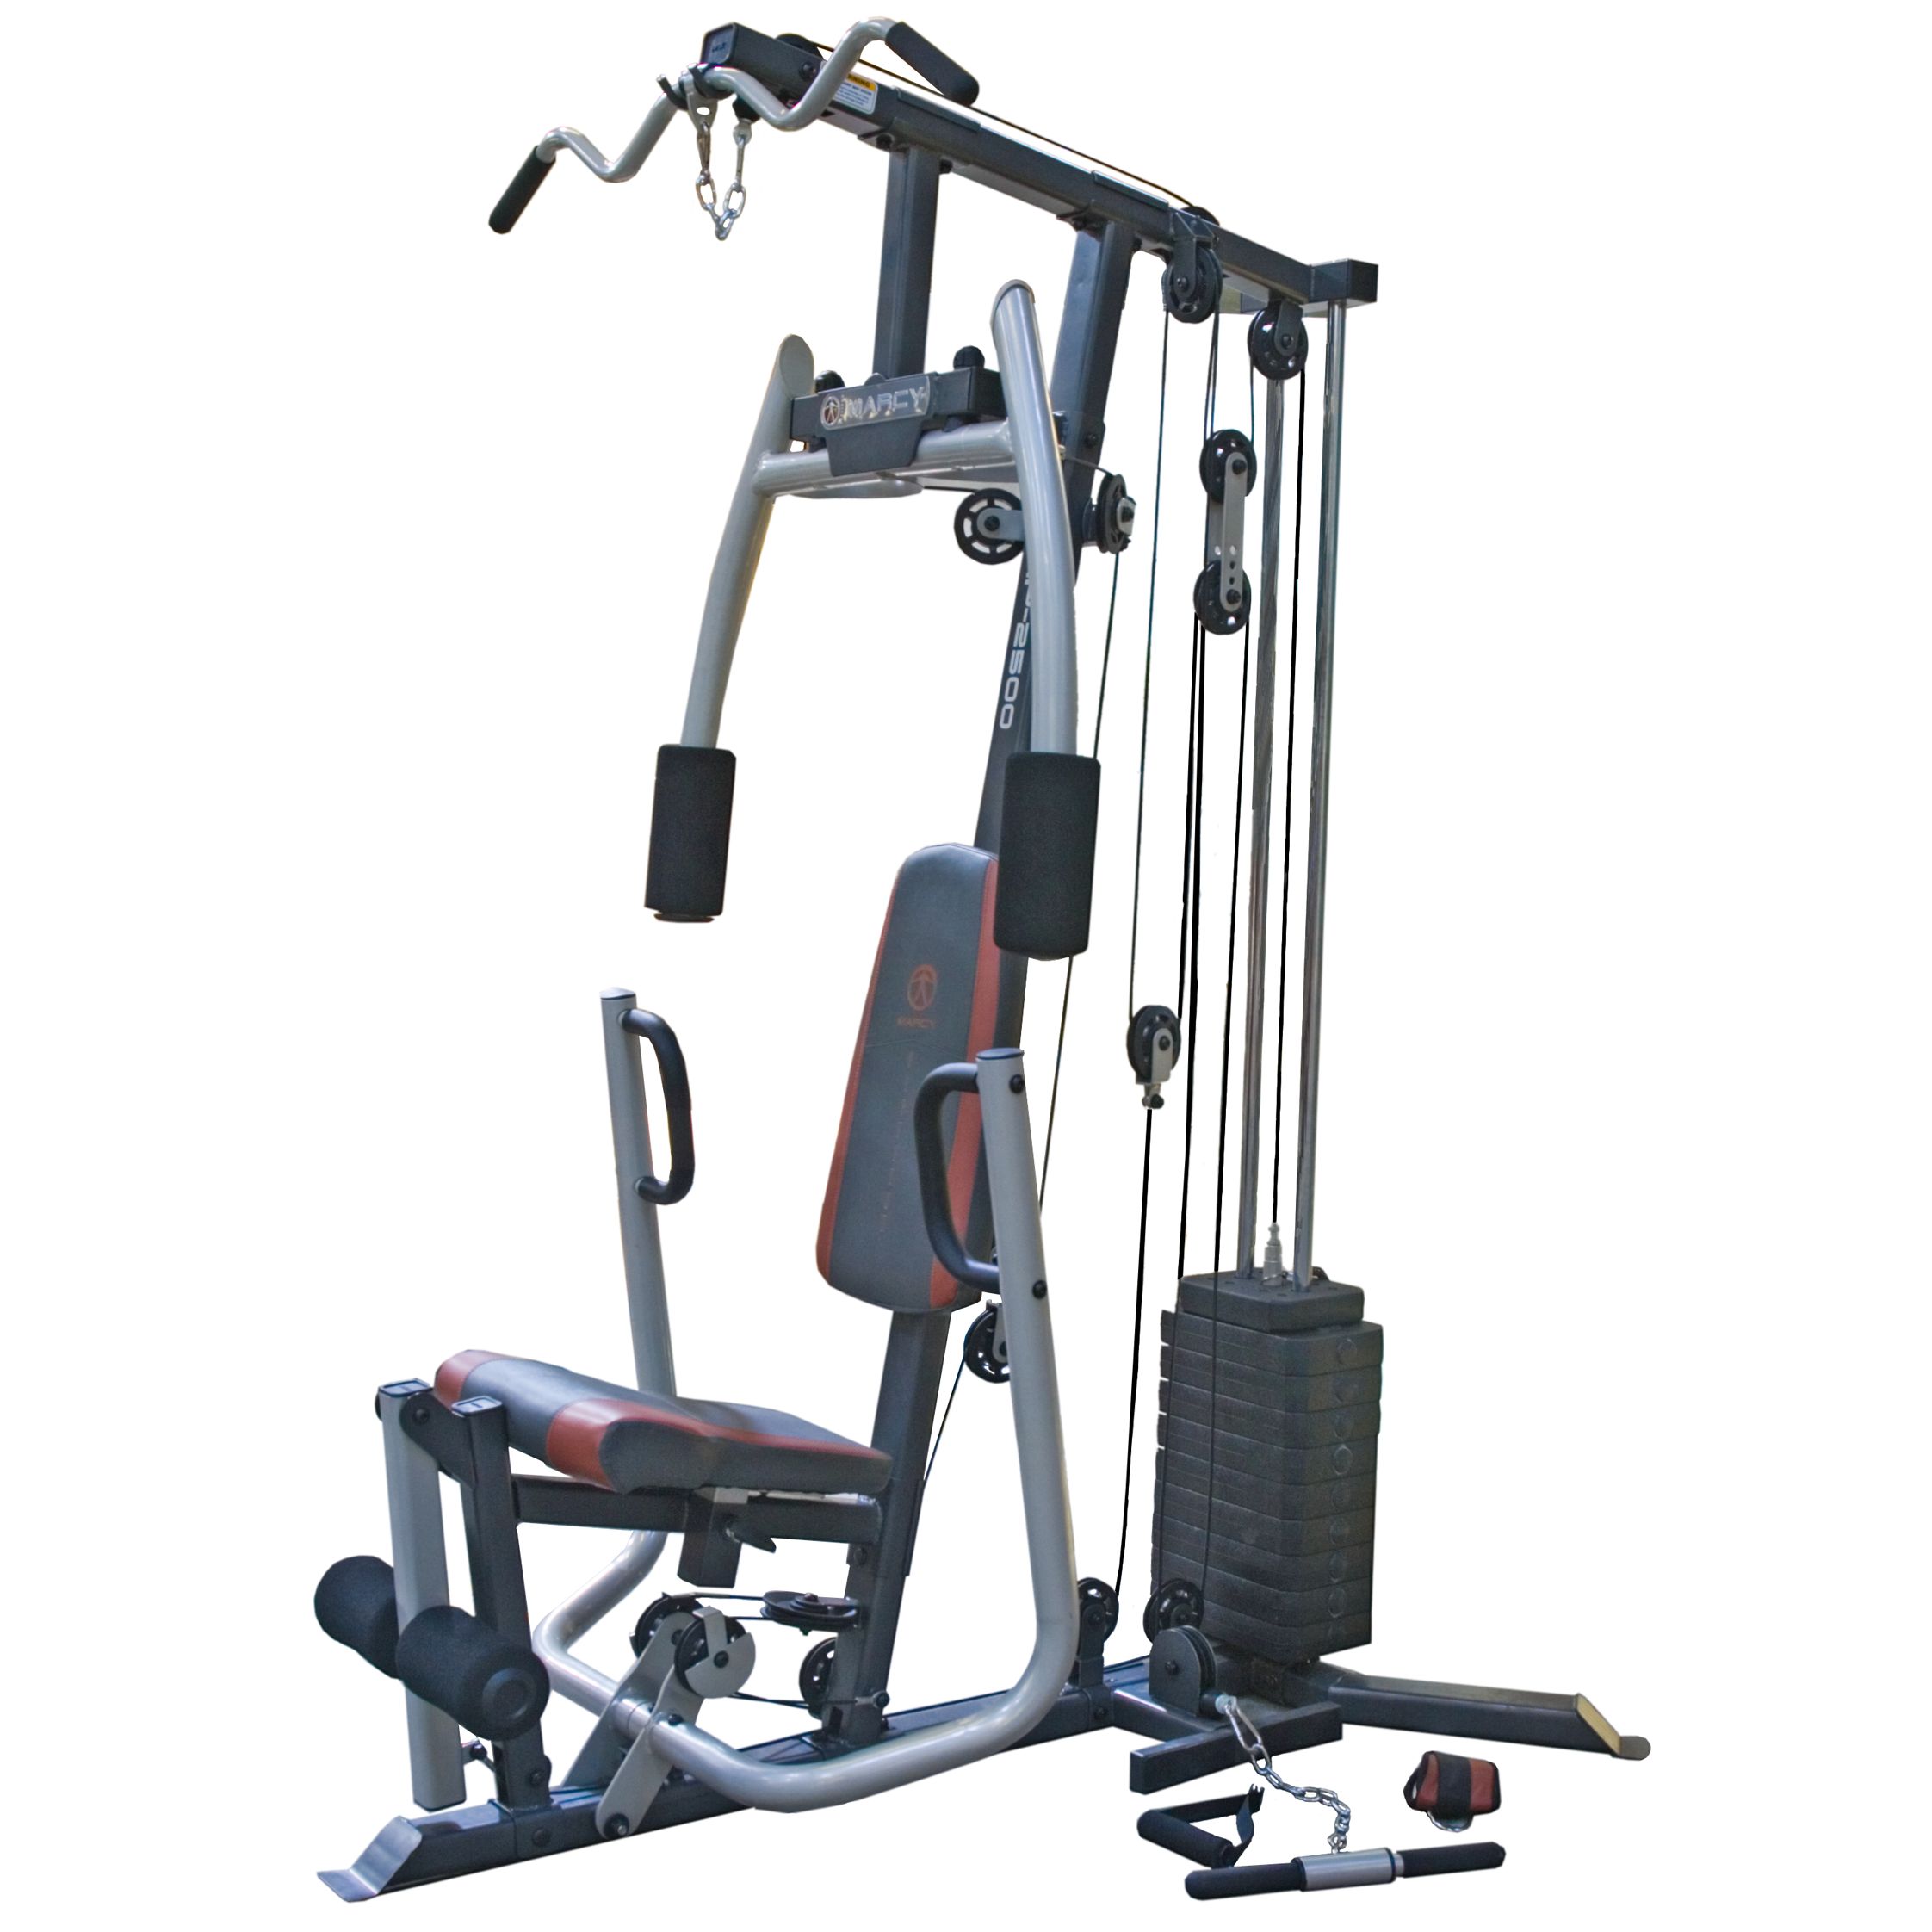 Marcy MP2500 Multi Gym at JohnLewis